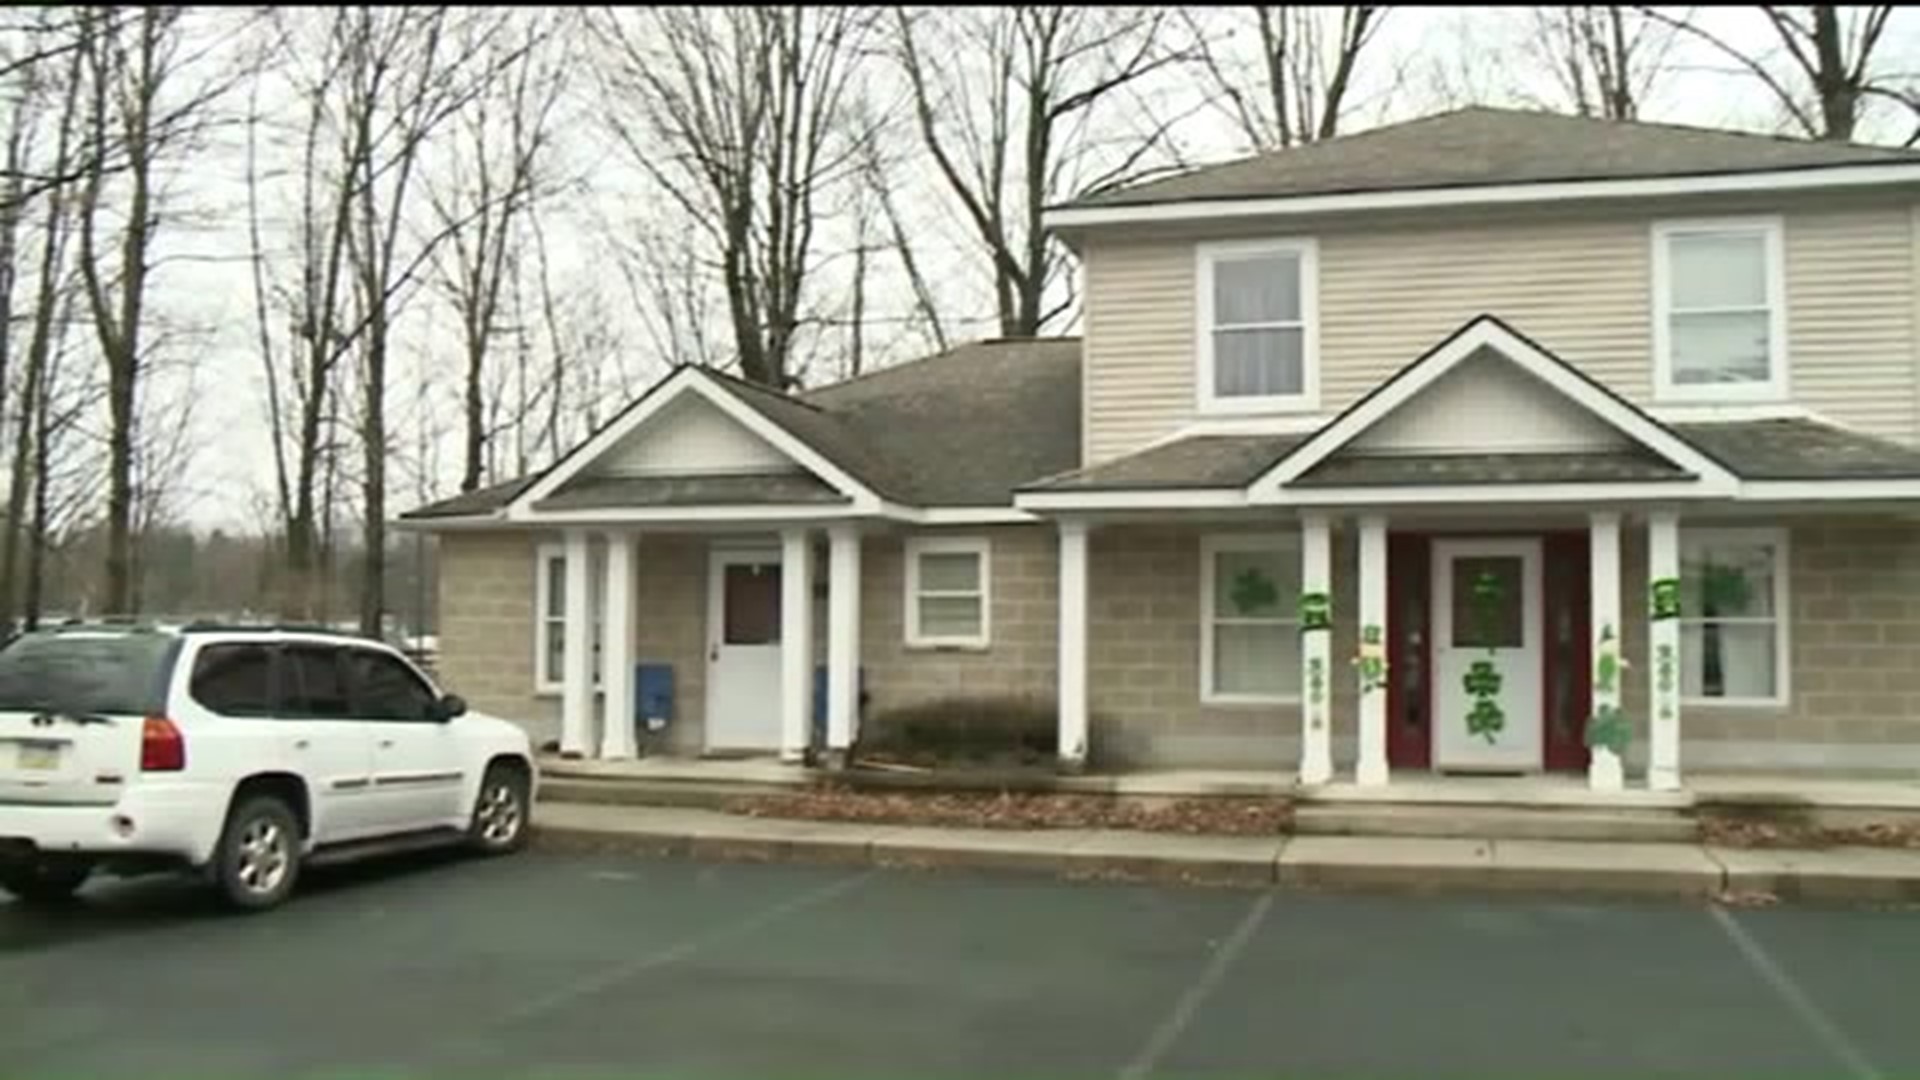 Salvation Army to Build New Shelter in East Stroudsburg